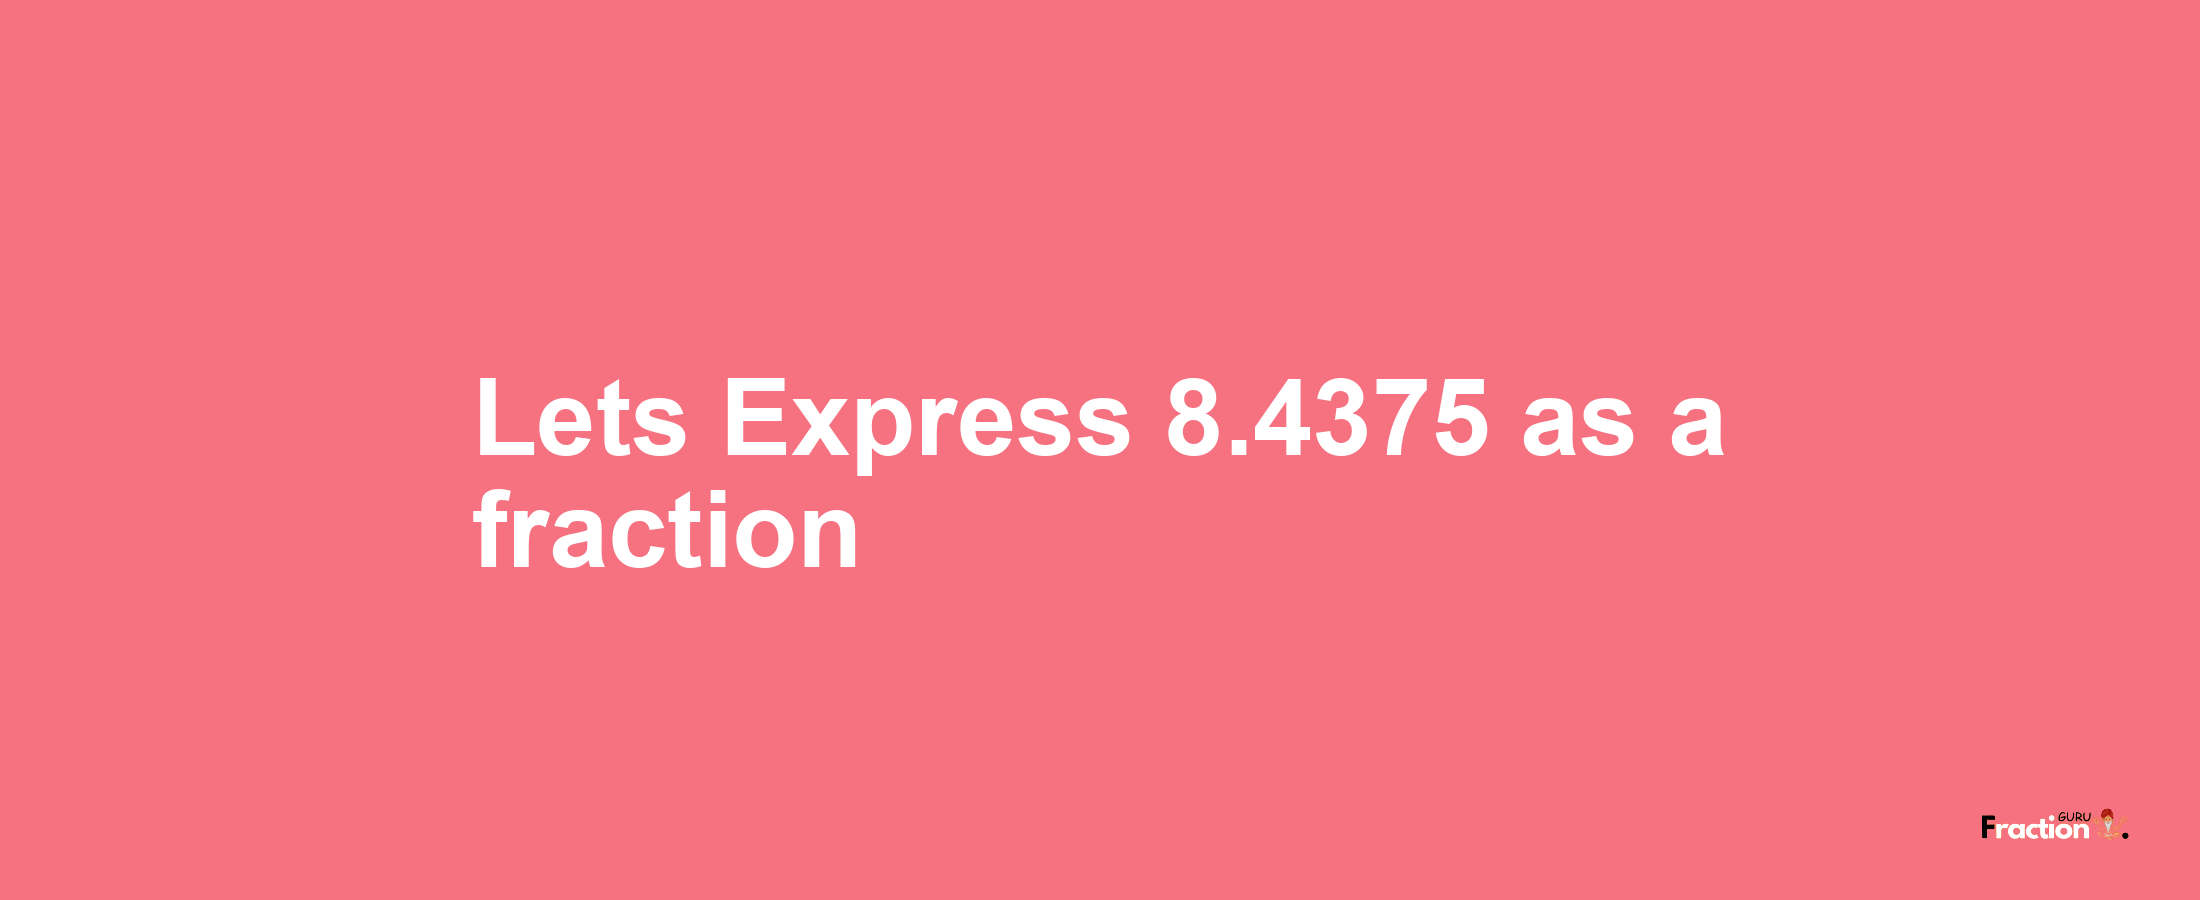 Lets Express 8.4375 as afraction